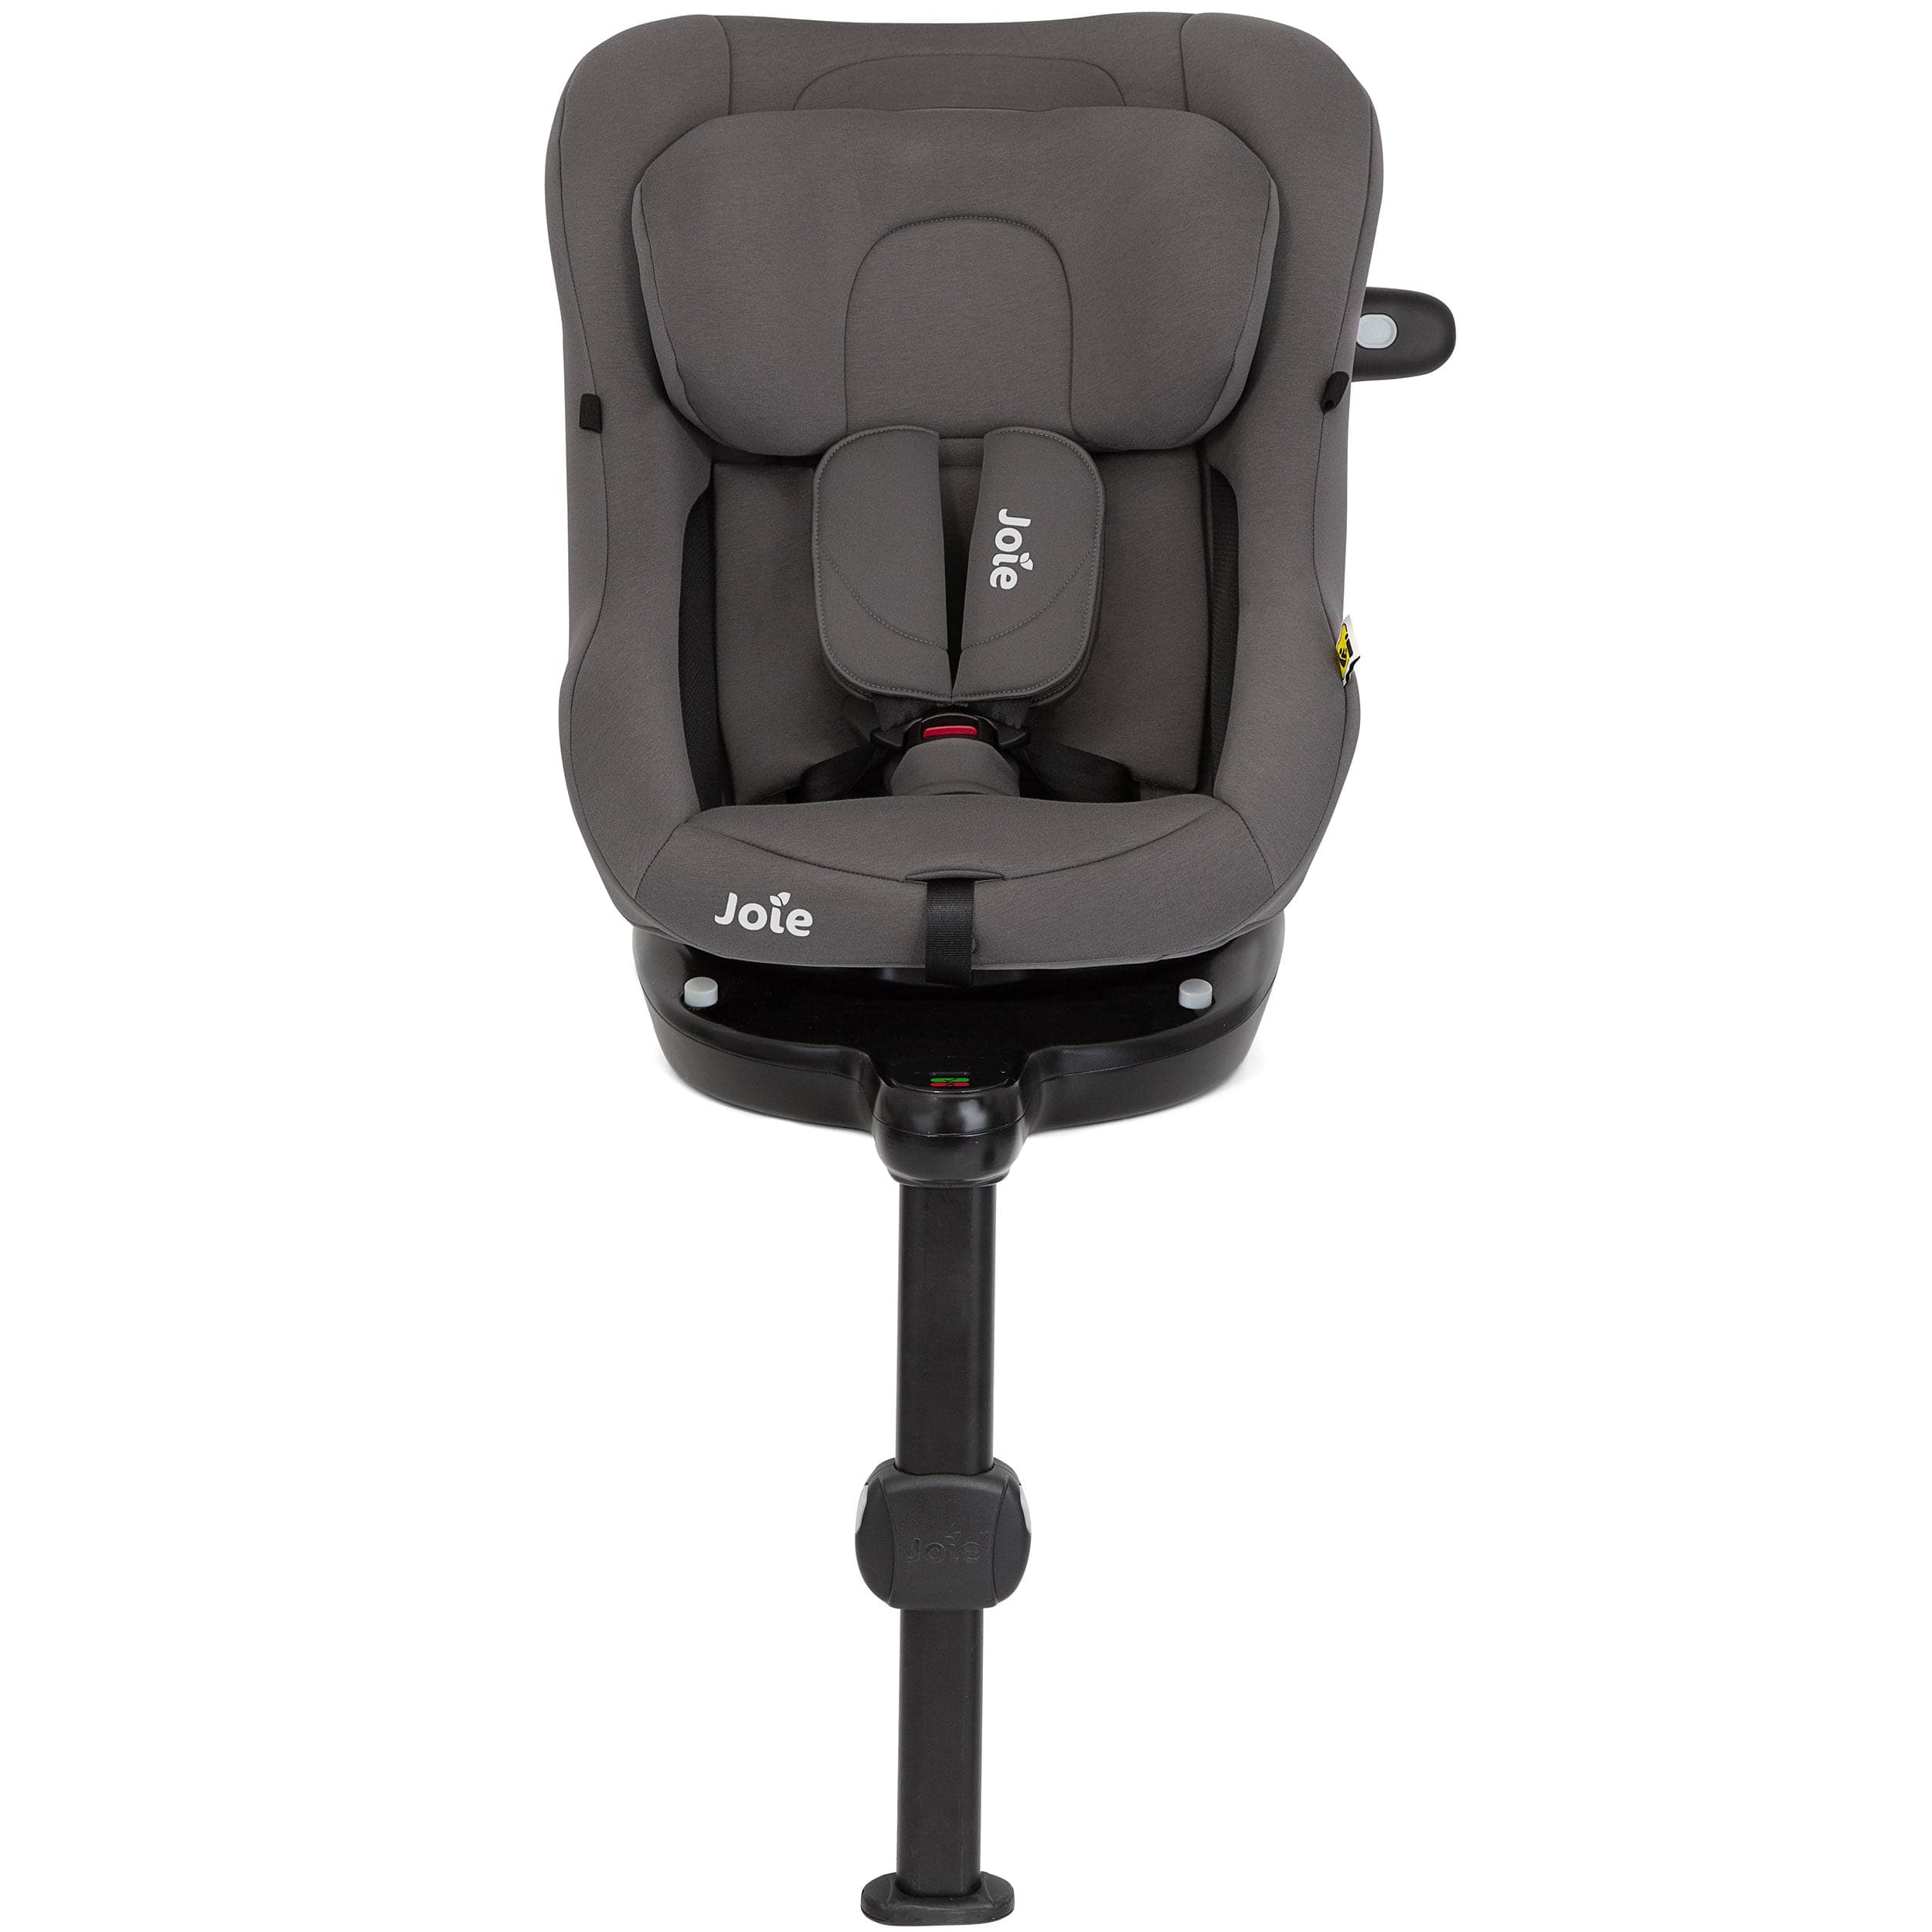 Joie i-Pivot 360 Car Seat in Thunder Baby Car Seats C2302AATHD000 5056080618630